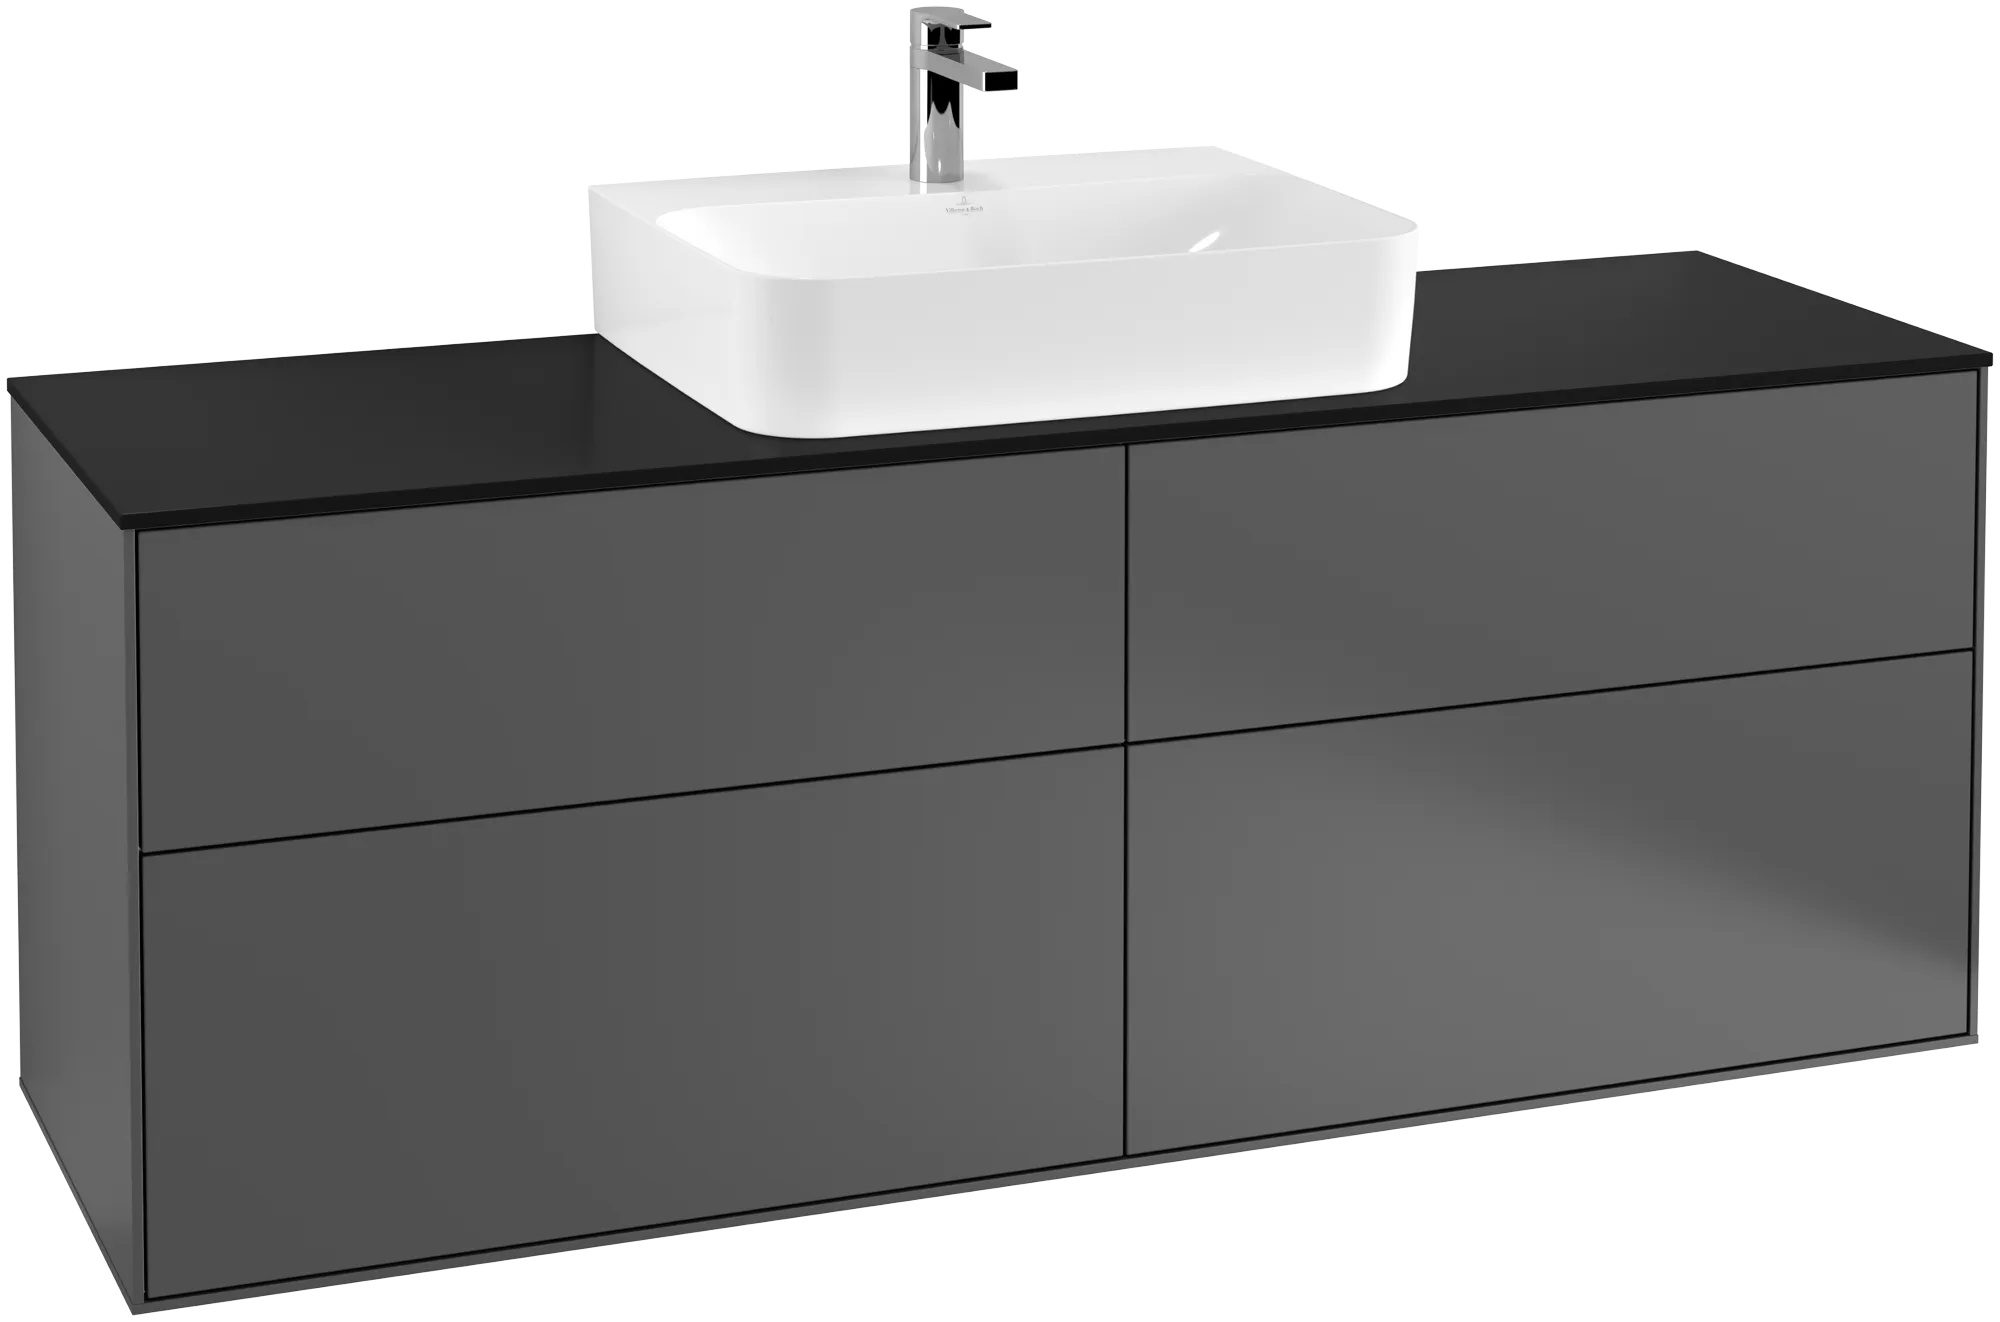 Picture of VILLEROY BOCH Finion Vanity unit, with lighting, 4 pull-out compartments, 1600 x 603 x 501 mm, Anthracite Matt Lacquer / Glass Black Matt #G19200GK